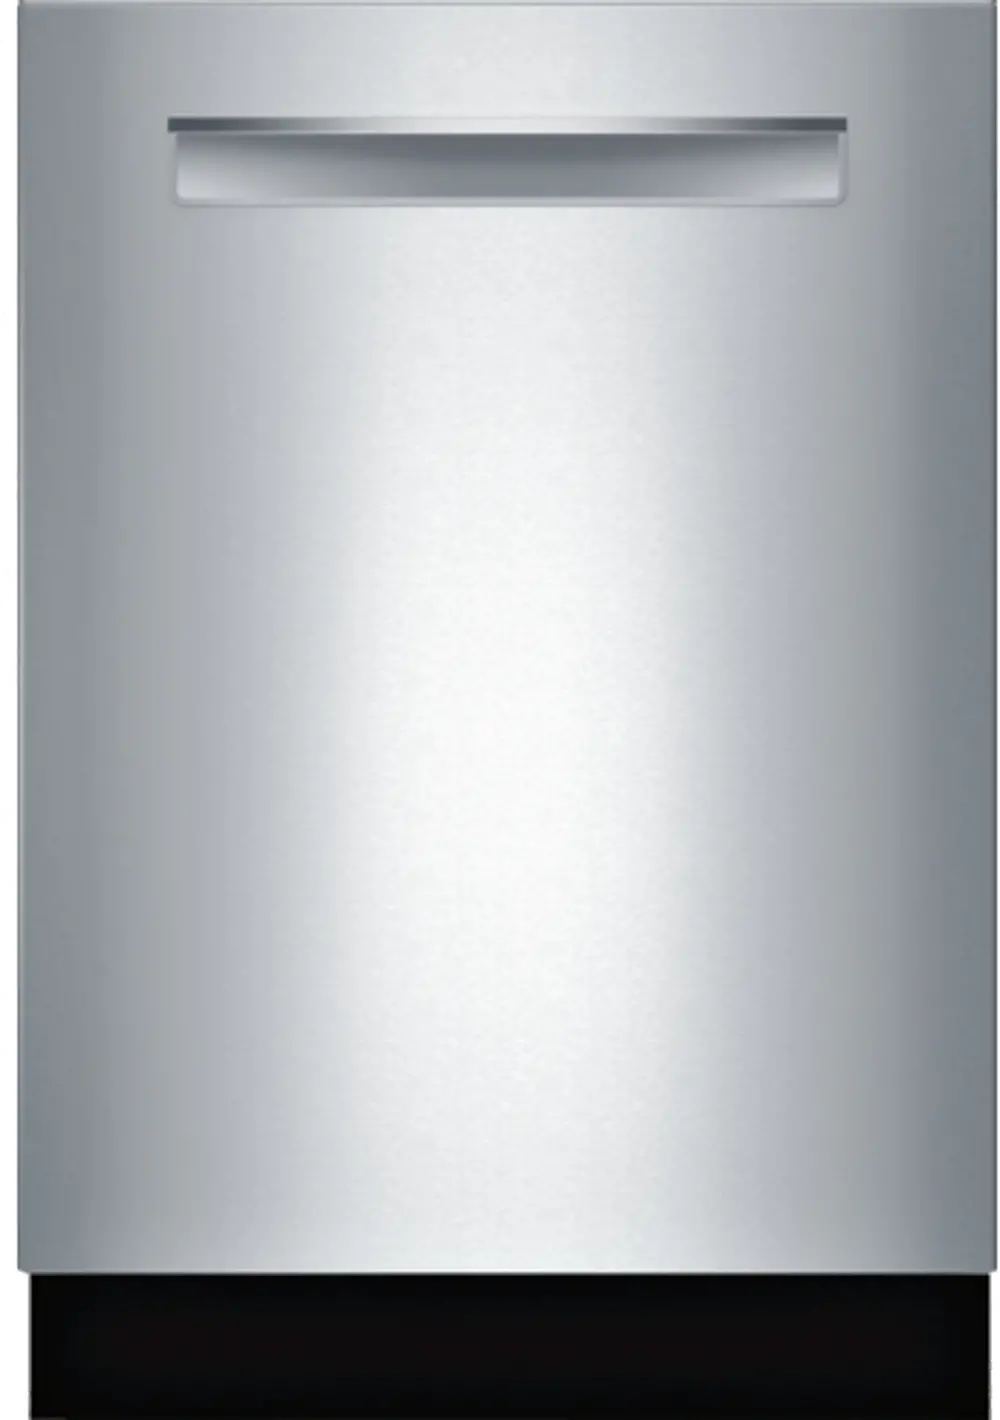 SHP88PW55N Bosch Benchmark Dishwasher - Stainless Steel-1